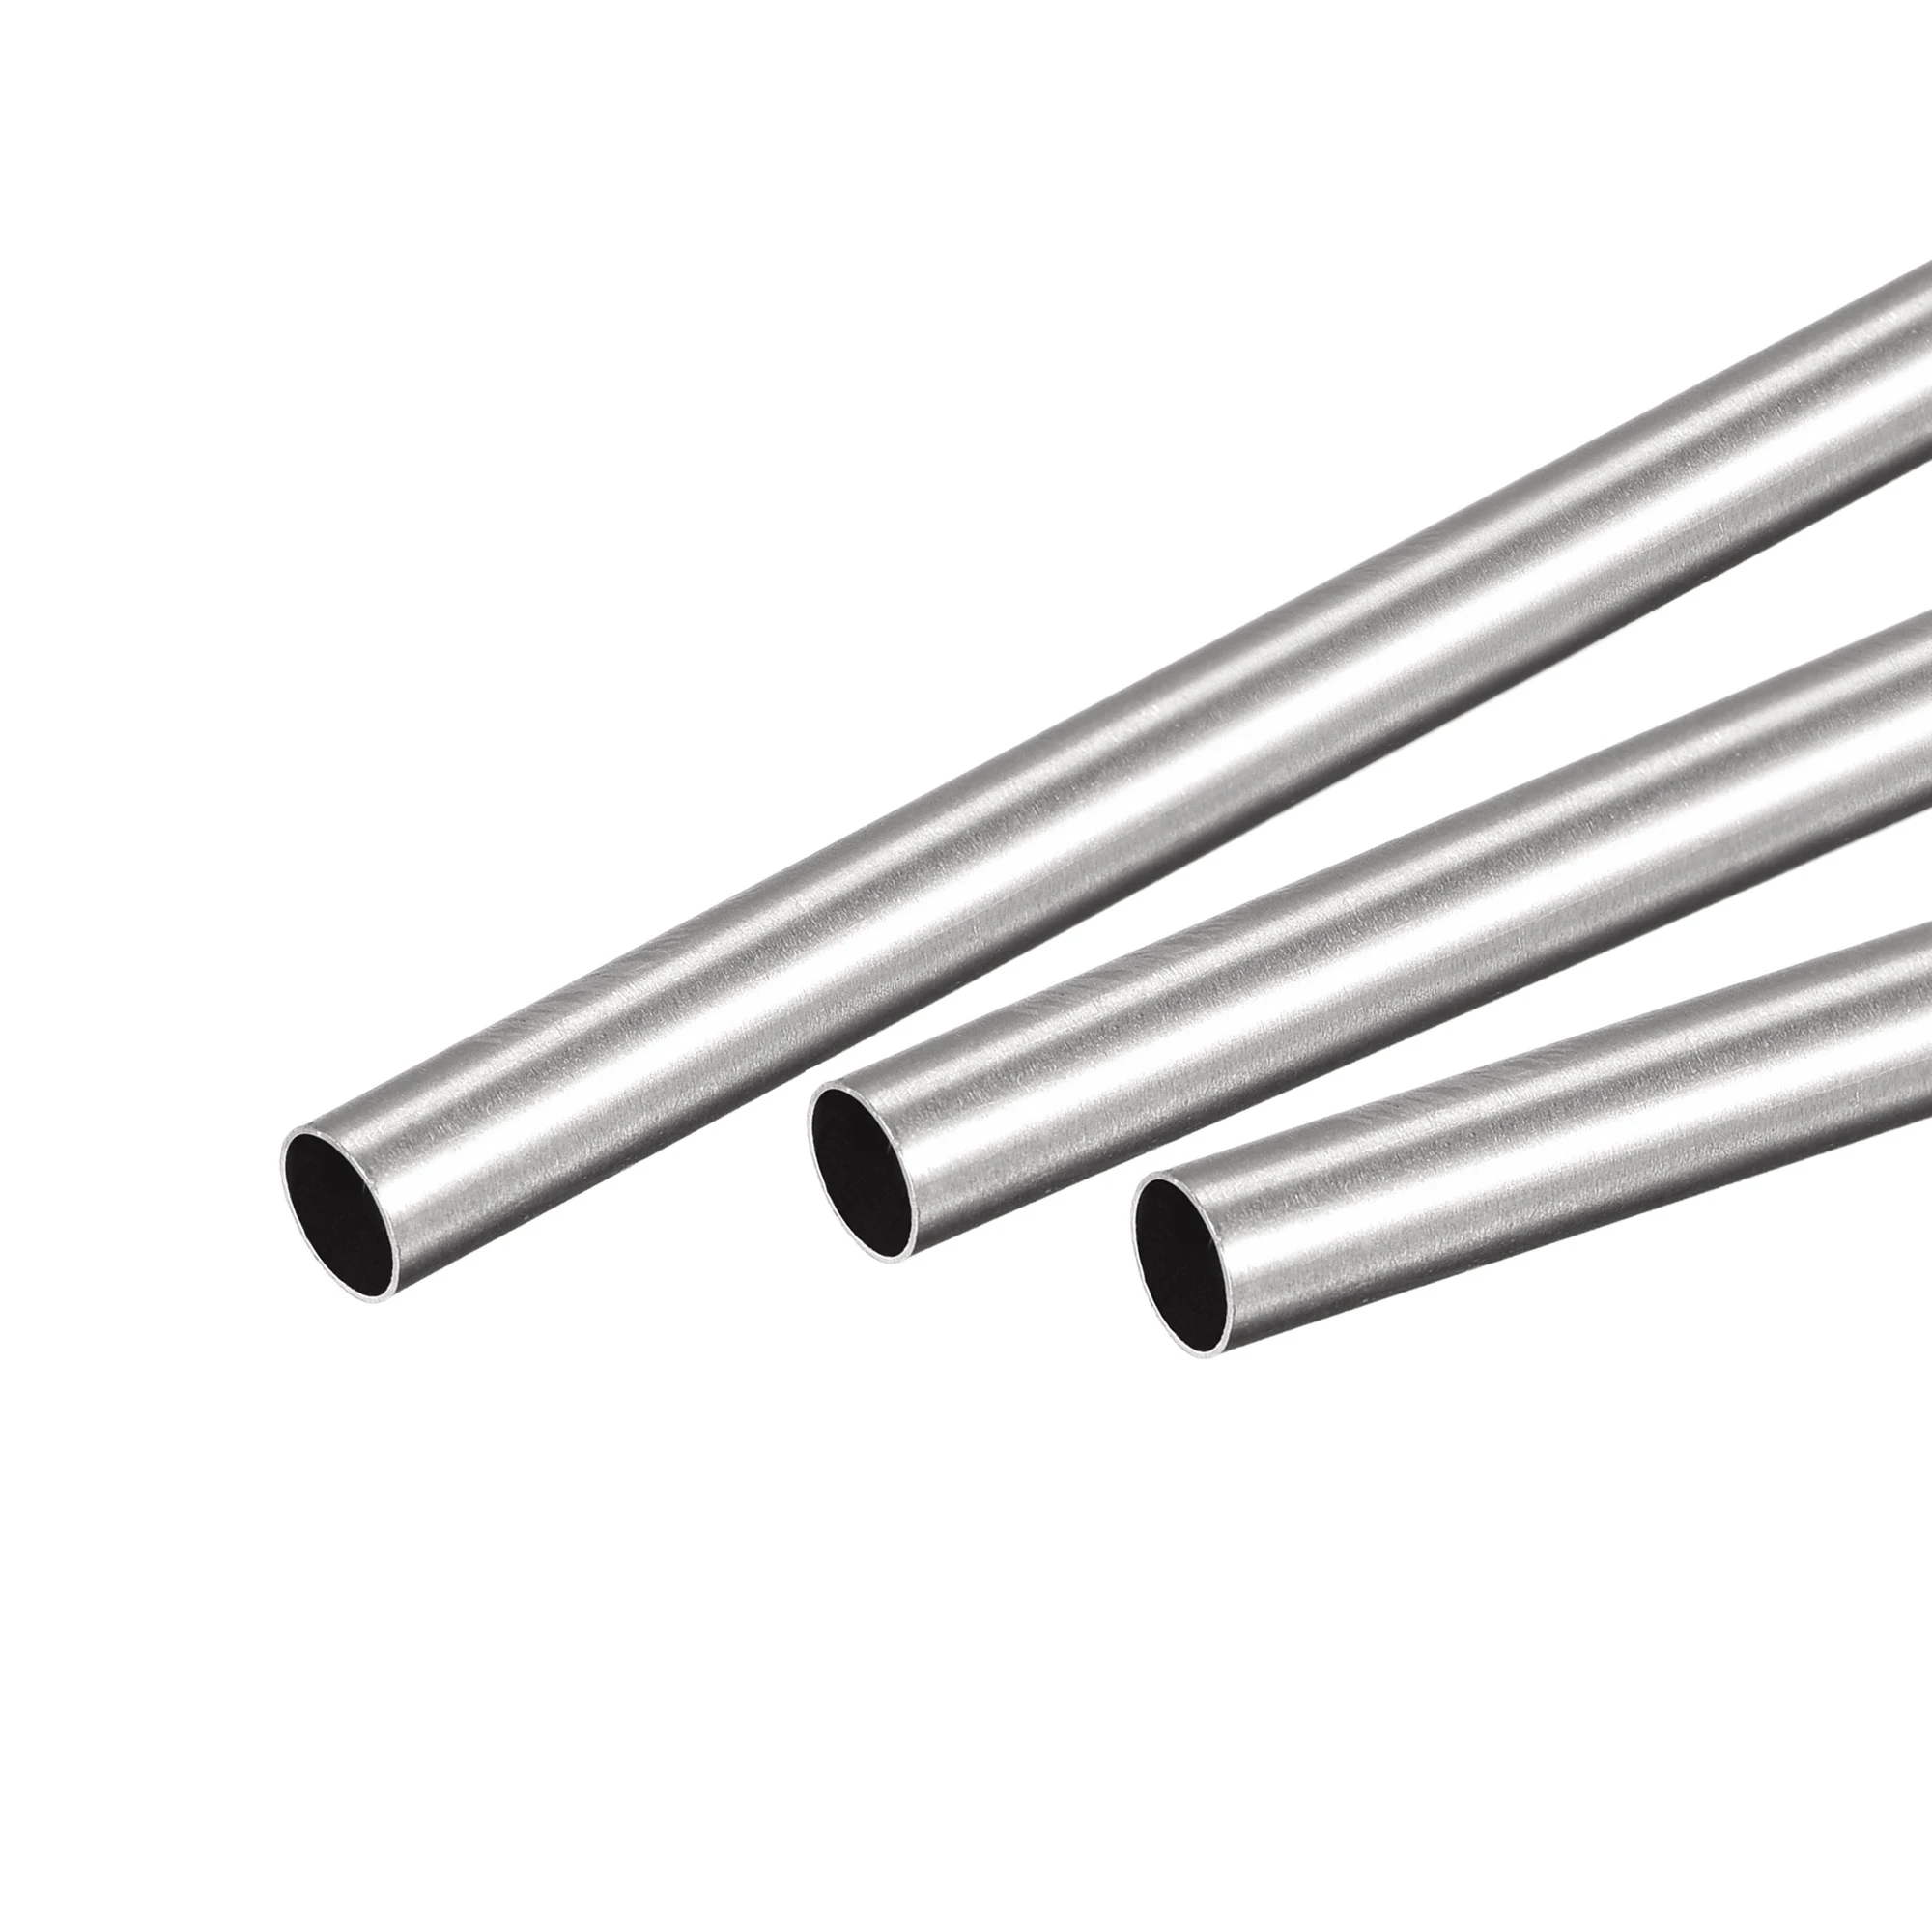 304 Stainless Steel Round Tubing 0.2mm Wall Thickness 250mm Length 